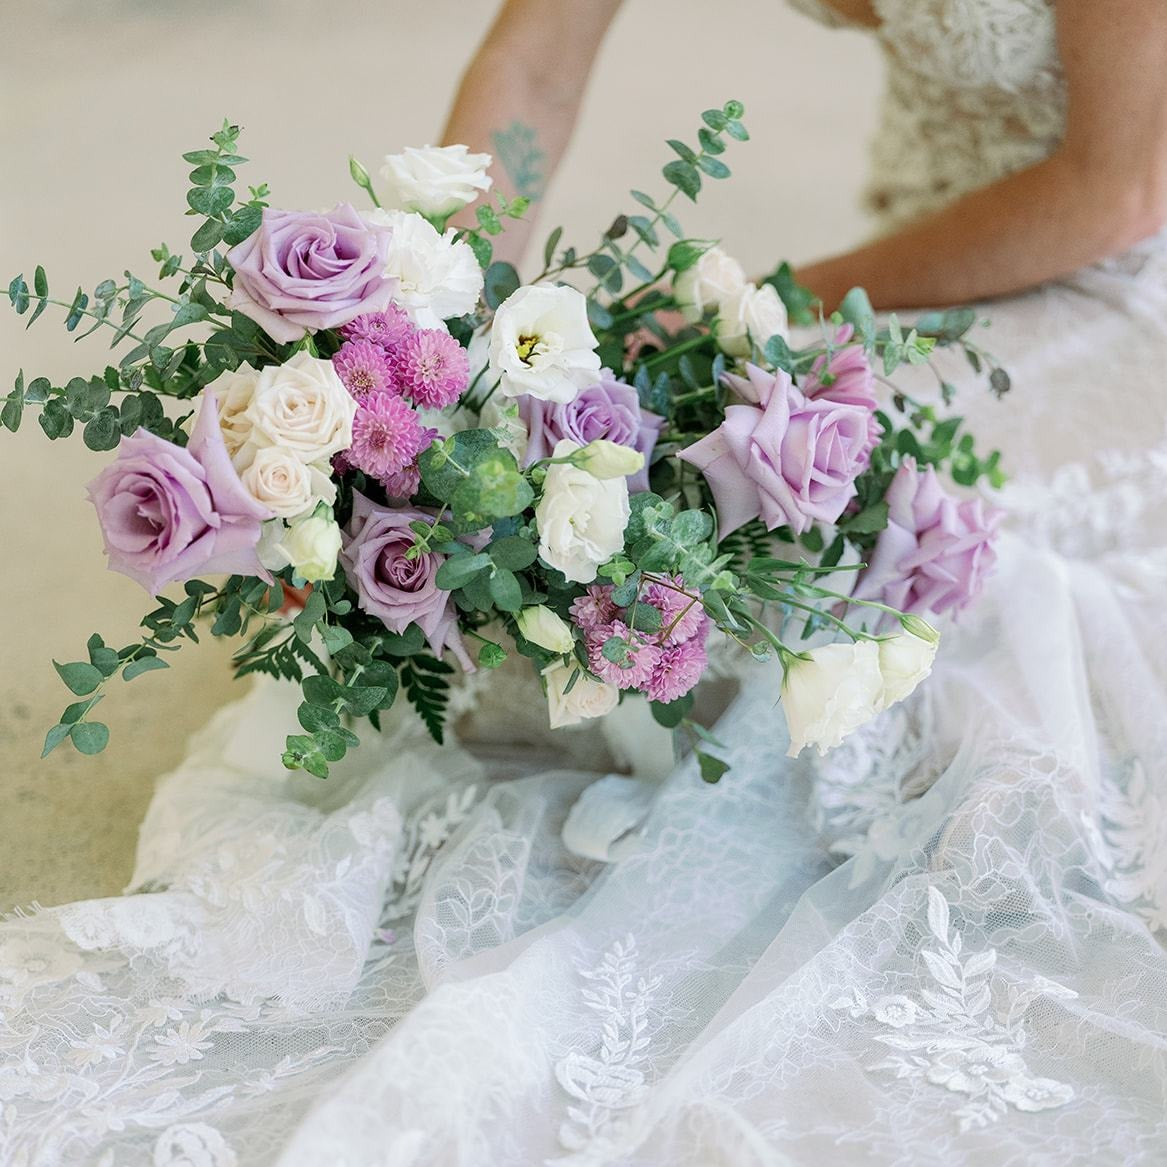 Lavender and cream Bridal Bouquet with Ocean Song, White Lisianthus, White Carnations DIY Flower Moxie